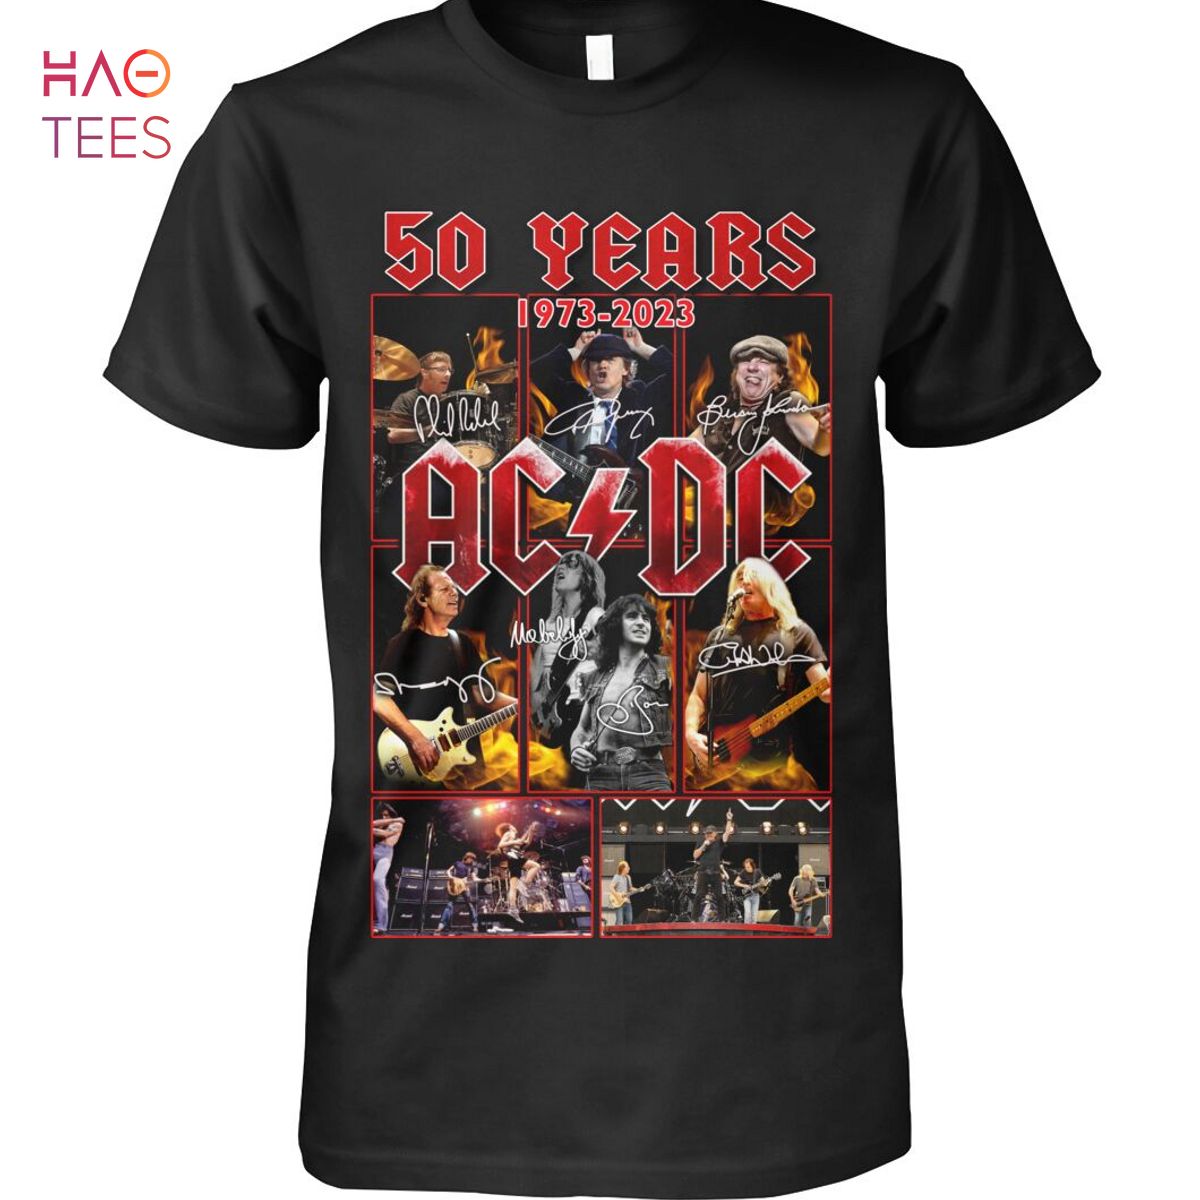 50 Years 1973-2023 ACDC Shirt Limited Edition